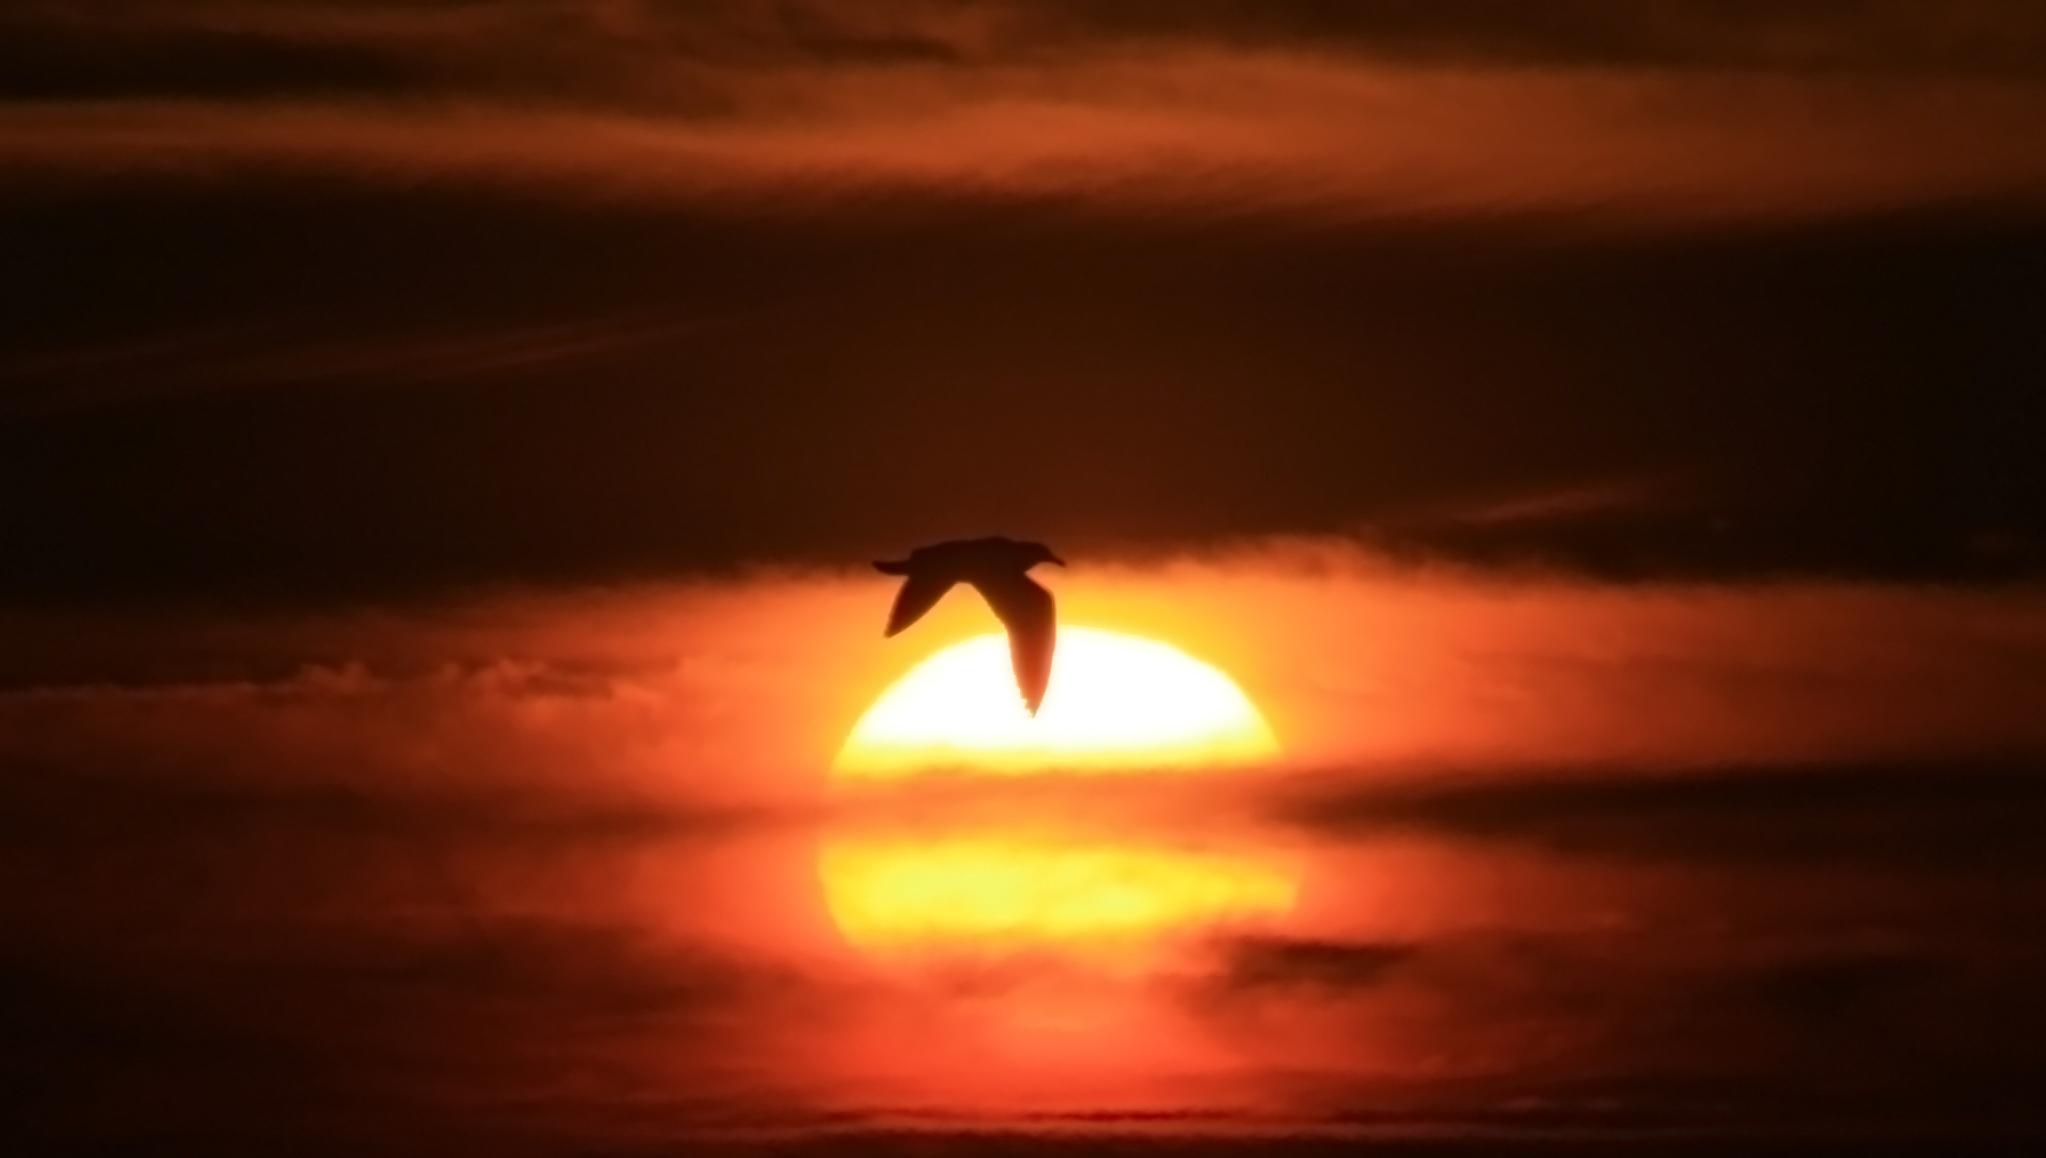 File:A bird touching the sun with his wing.jpg - Wikimedia Commons